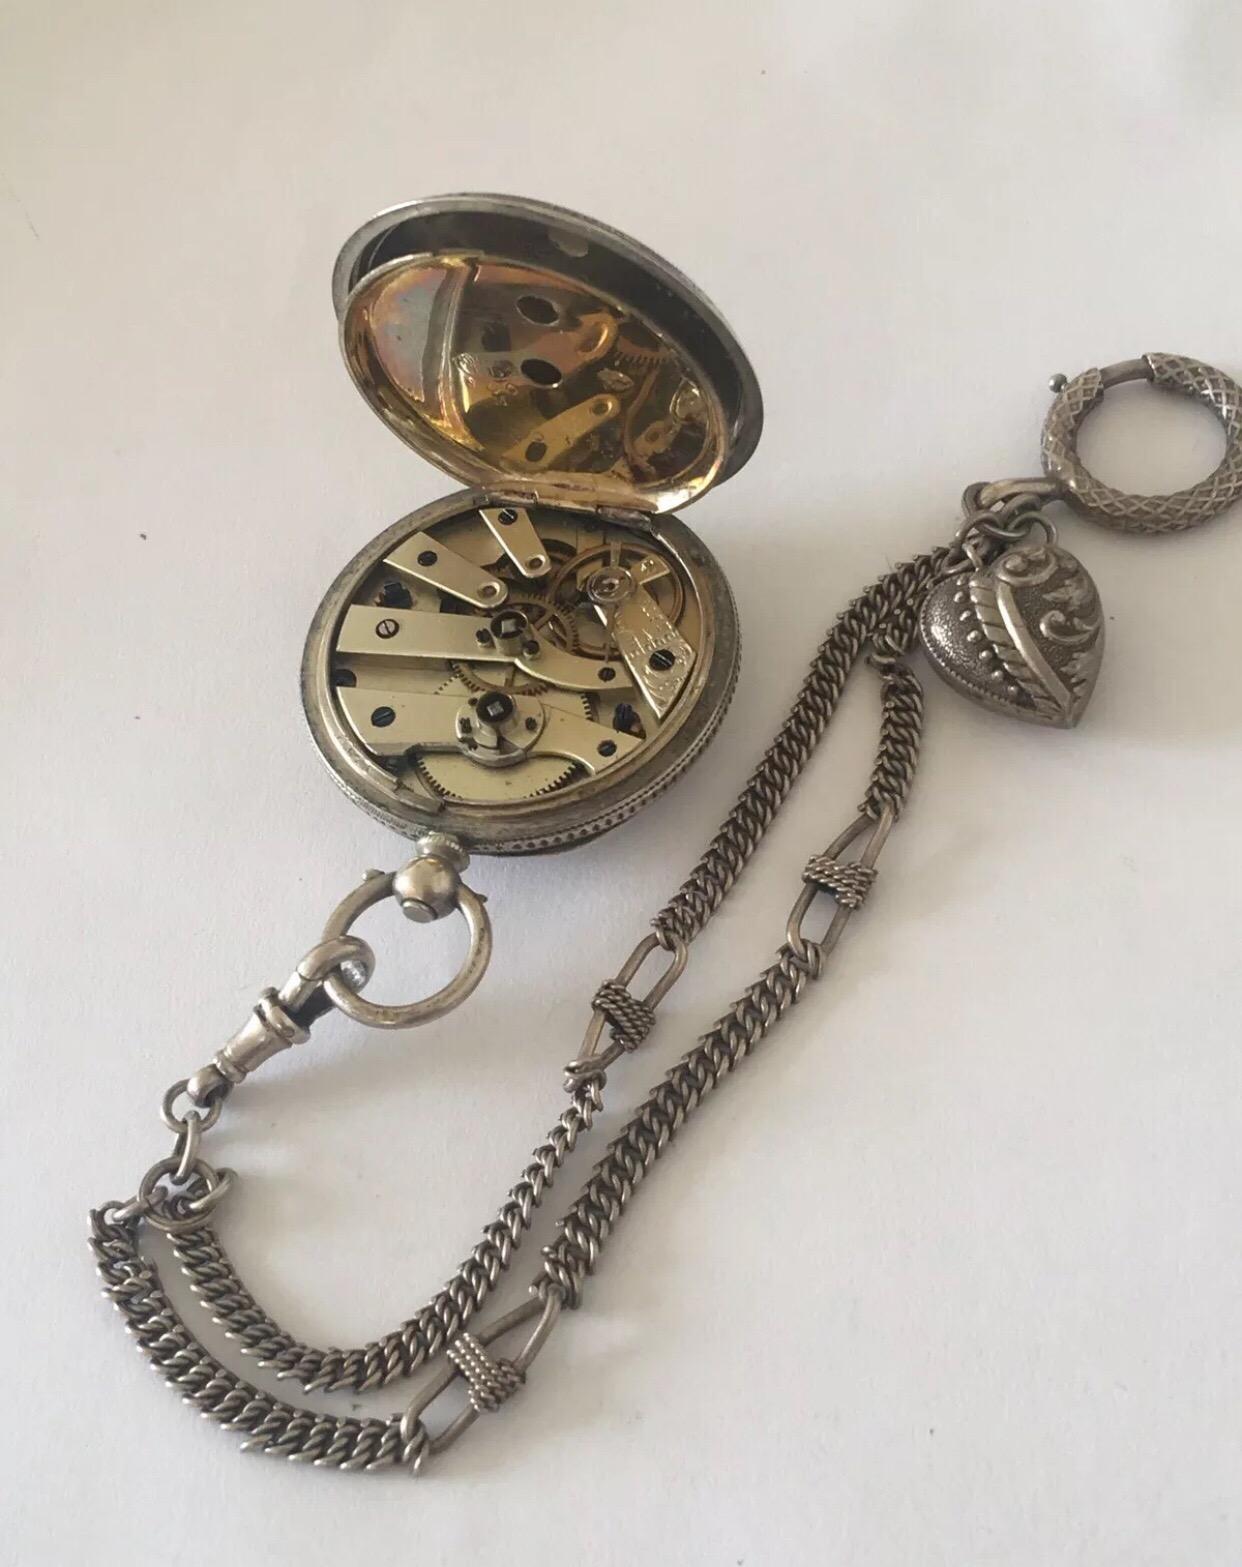 Beautiful Antique Silver Fob Watch with Its Own Pocket Watch Chain 1